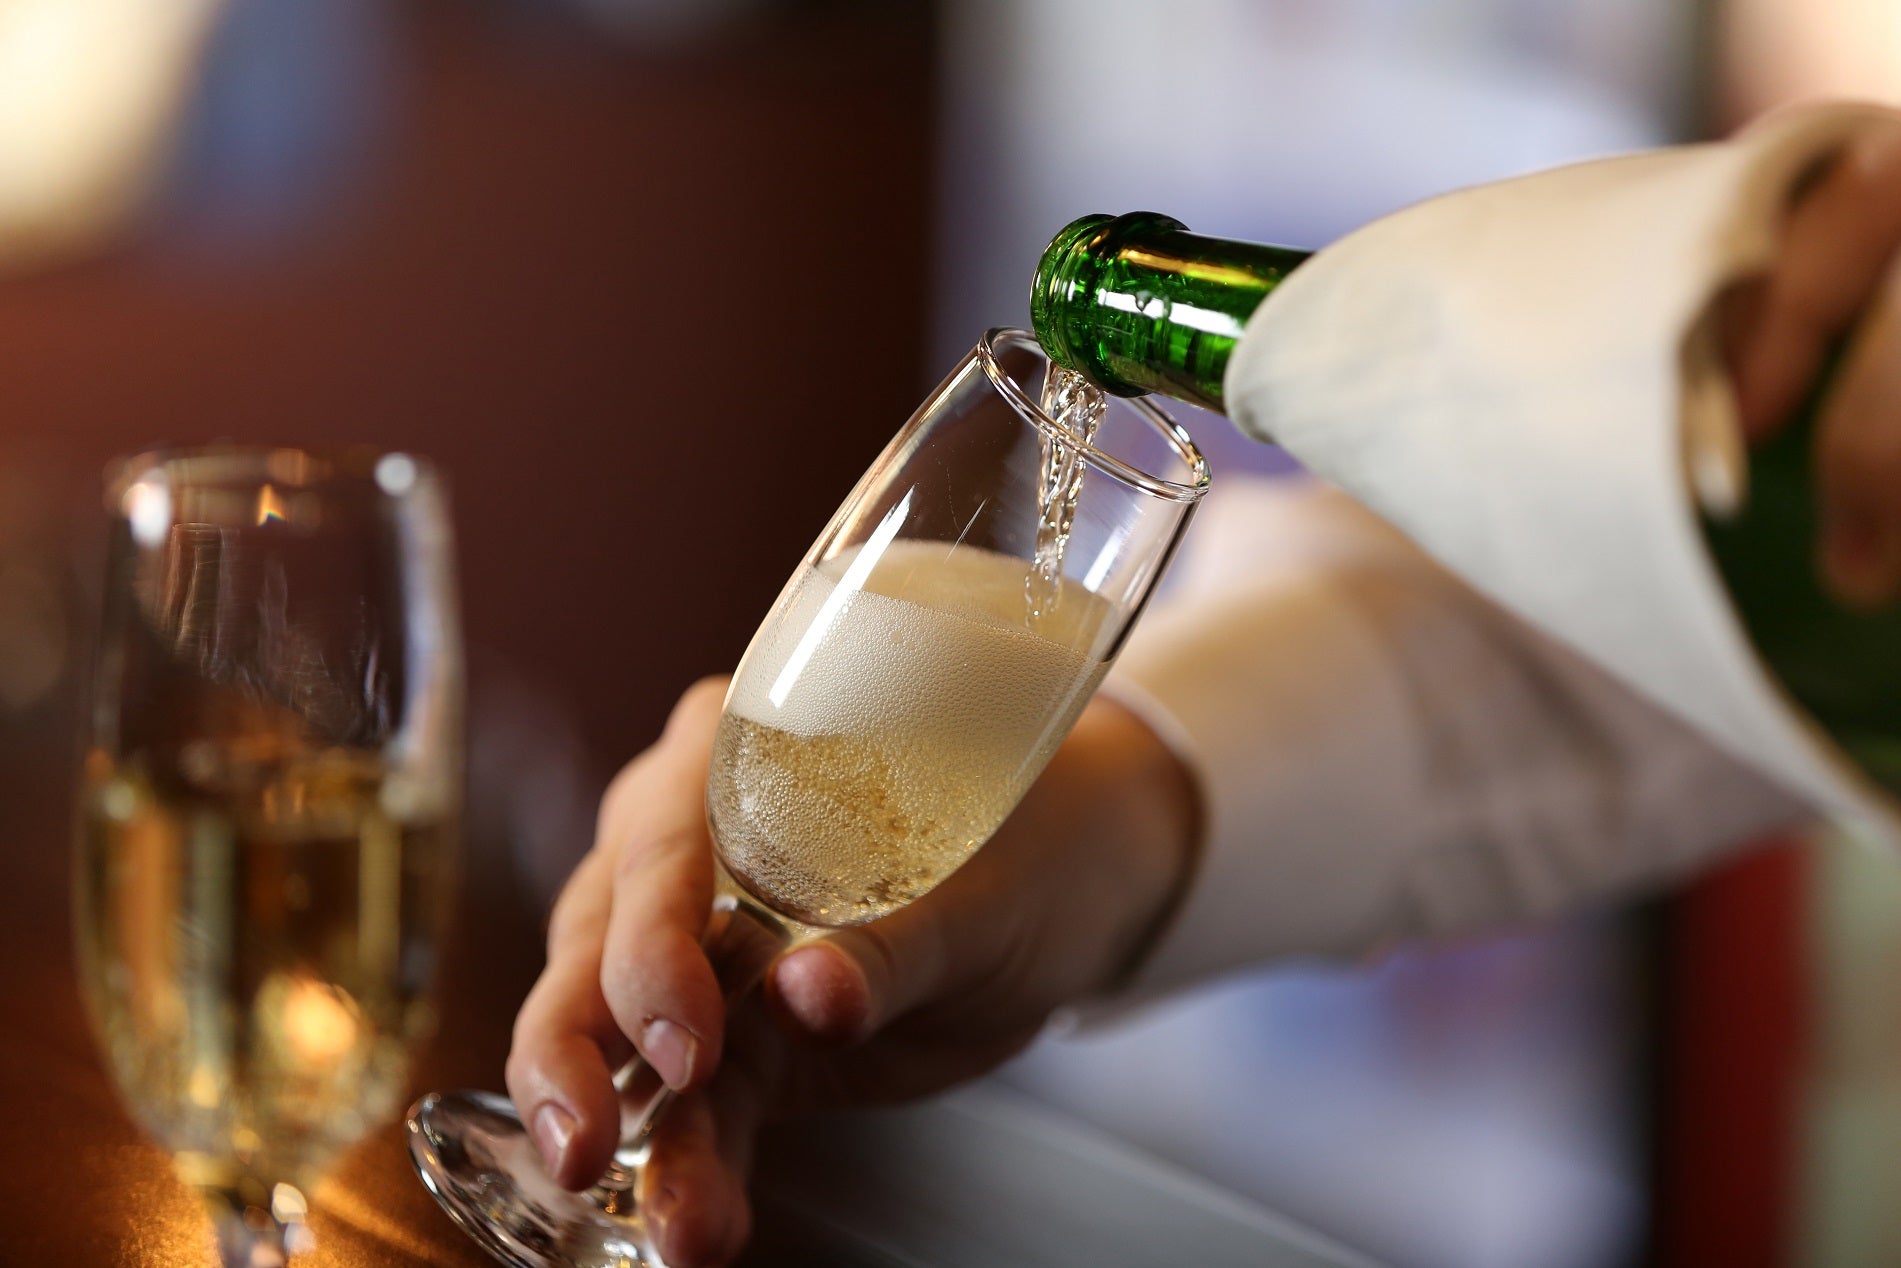 Hot summer gives fizz to Champagne but longer-term questions linger